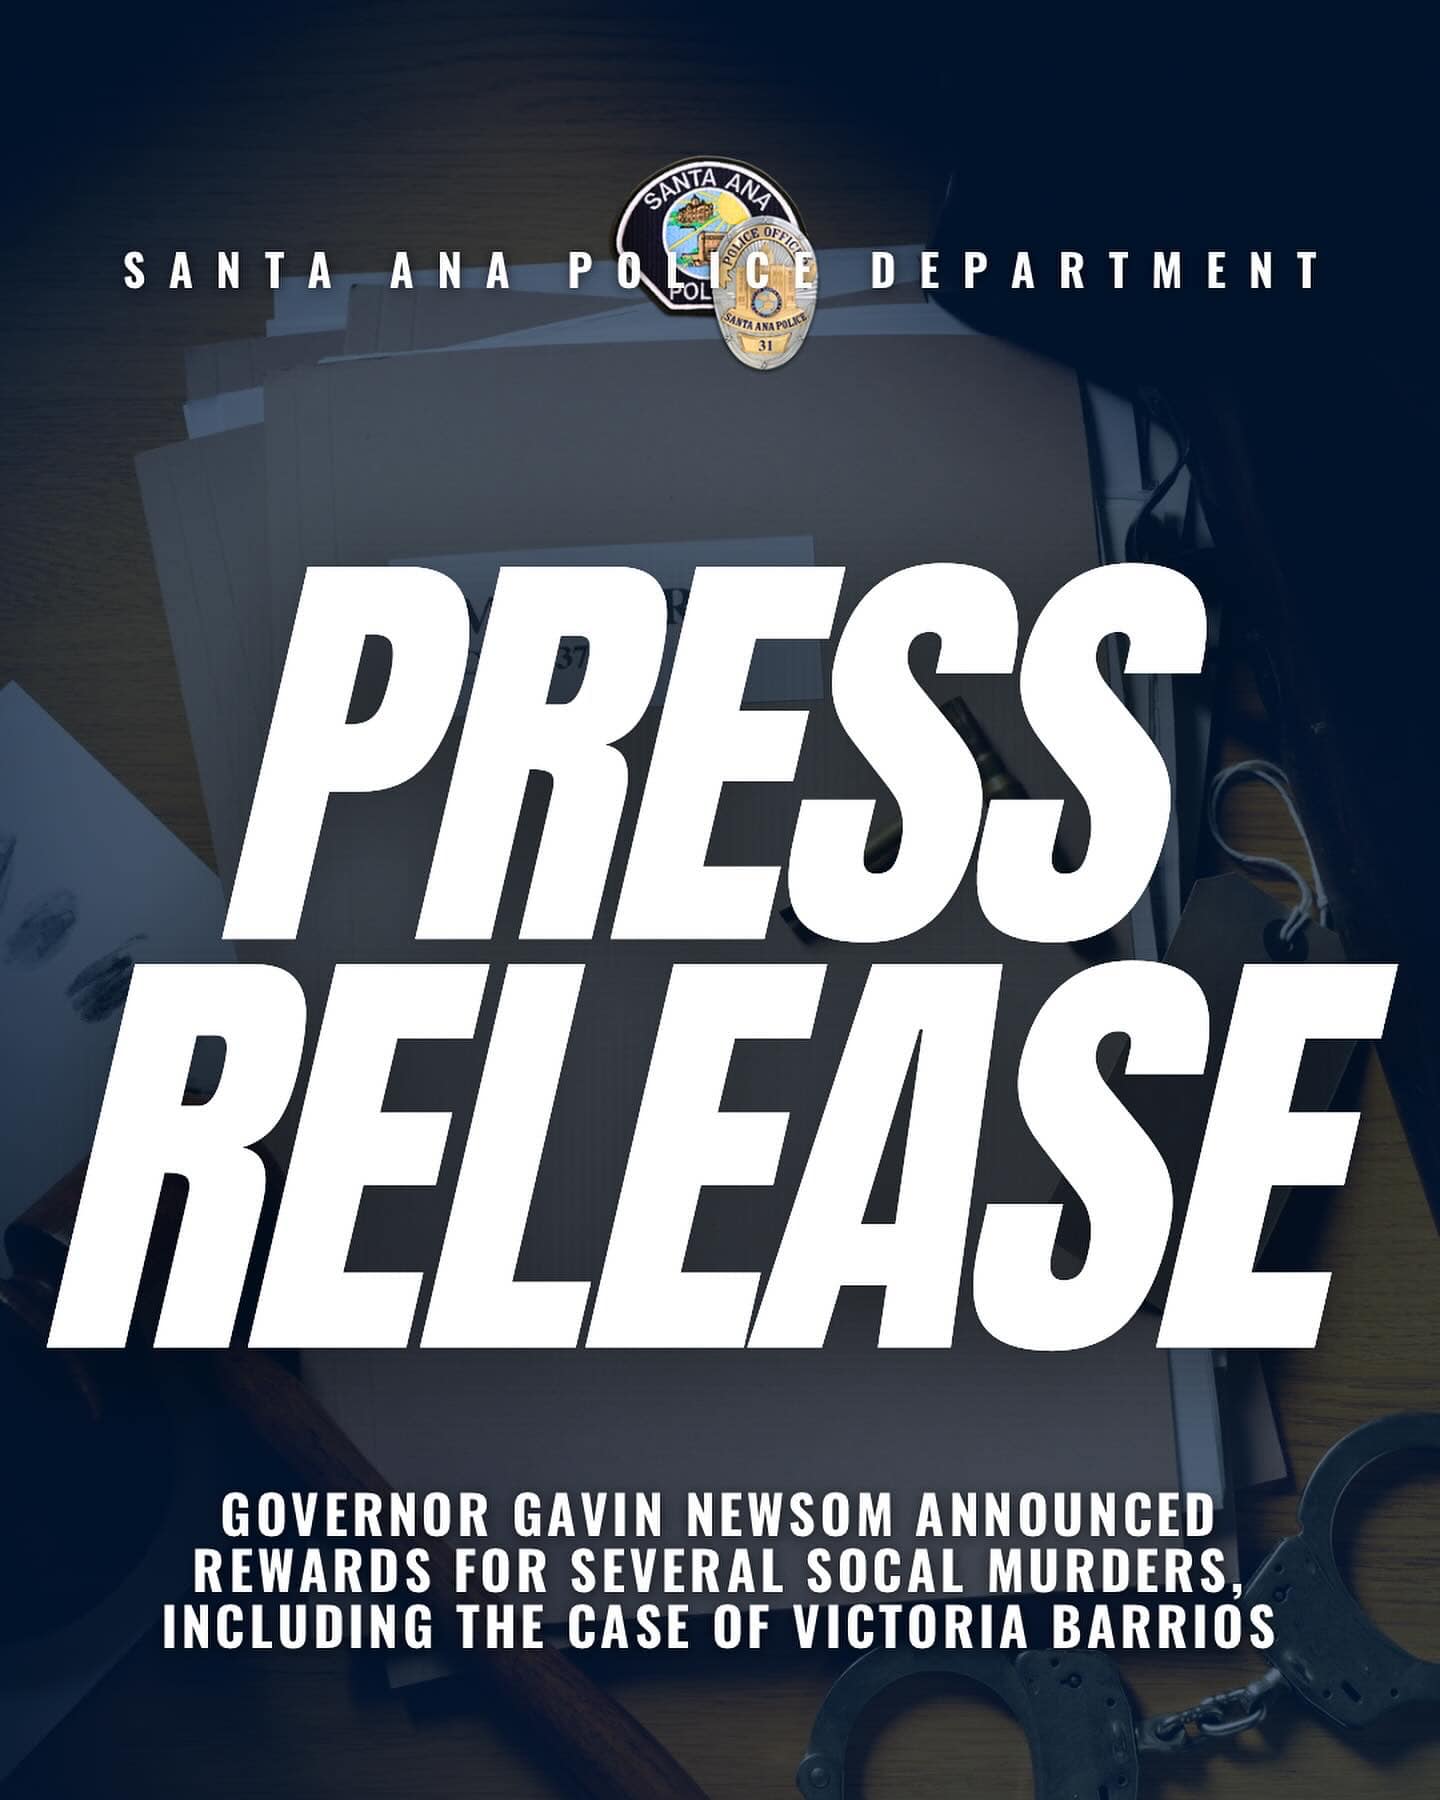 Governor Newsom announces rewards for Unsolved Murders in Santa Ana, Costa Mesa and San Diego